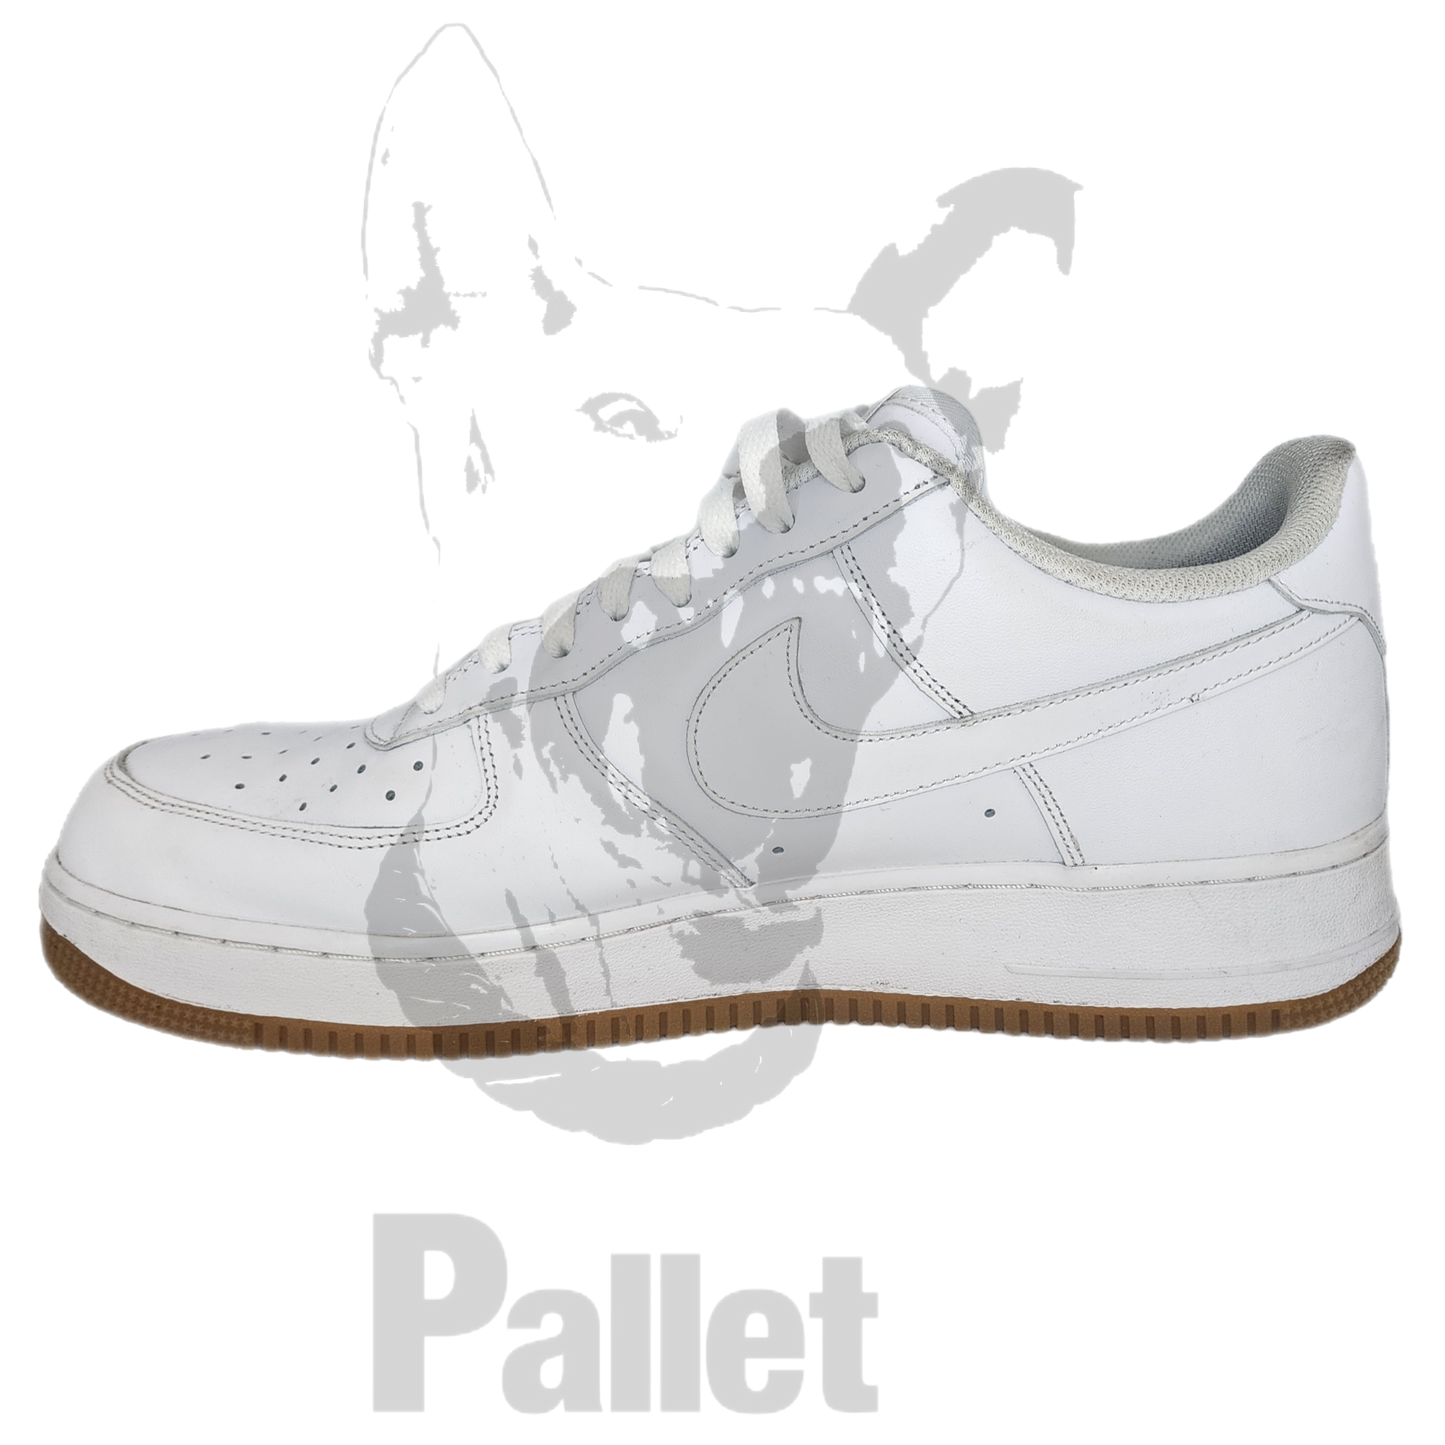 Nike - "Air Force 1 Low White Gum" - Size 13